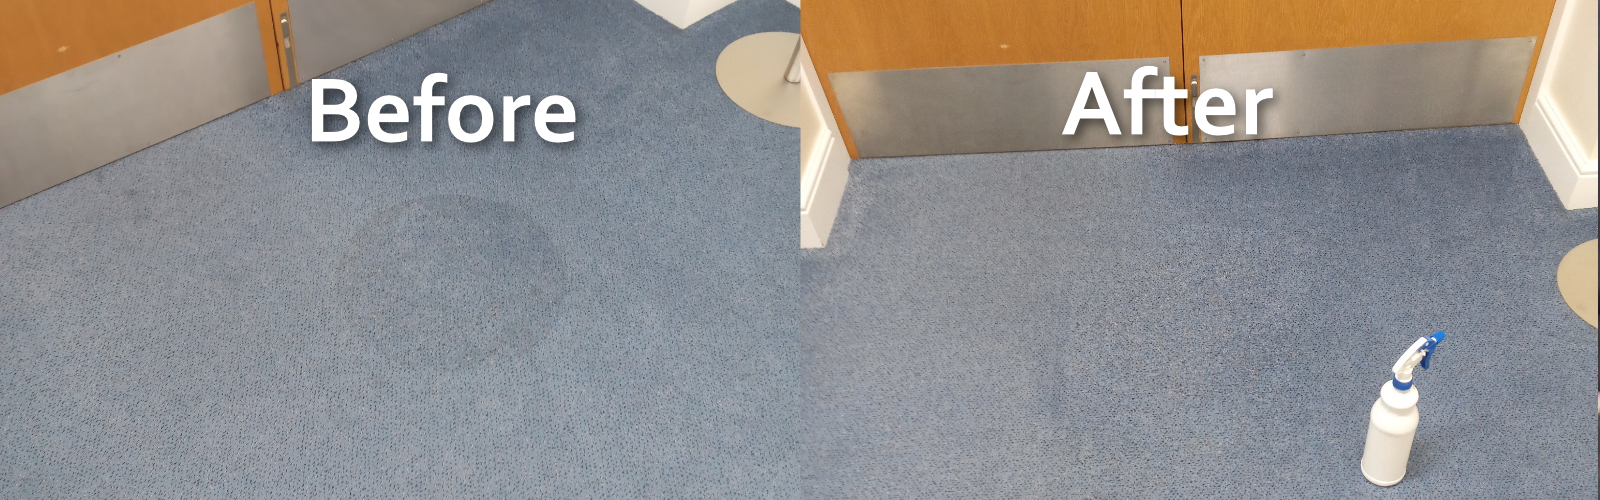 Carpet Cleaning Yorkshire